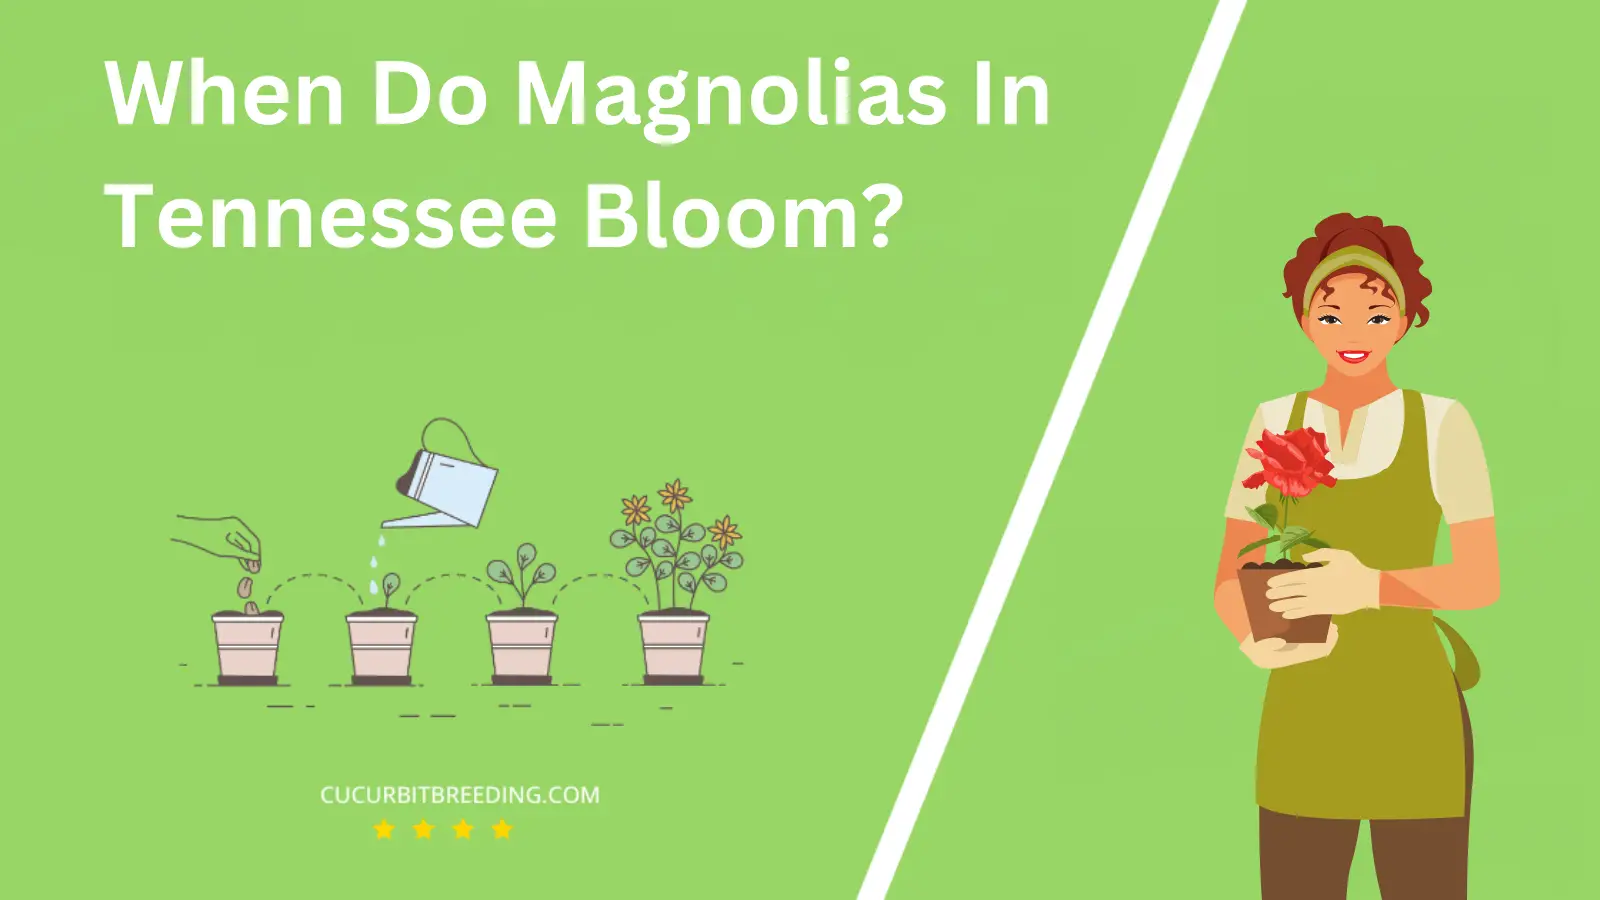 When Do Magnolias In Tennessee Bloom?